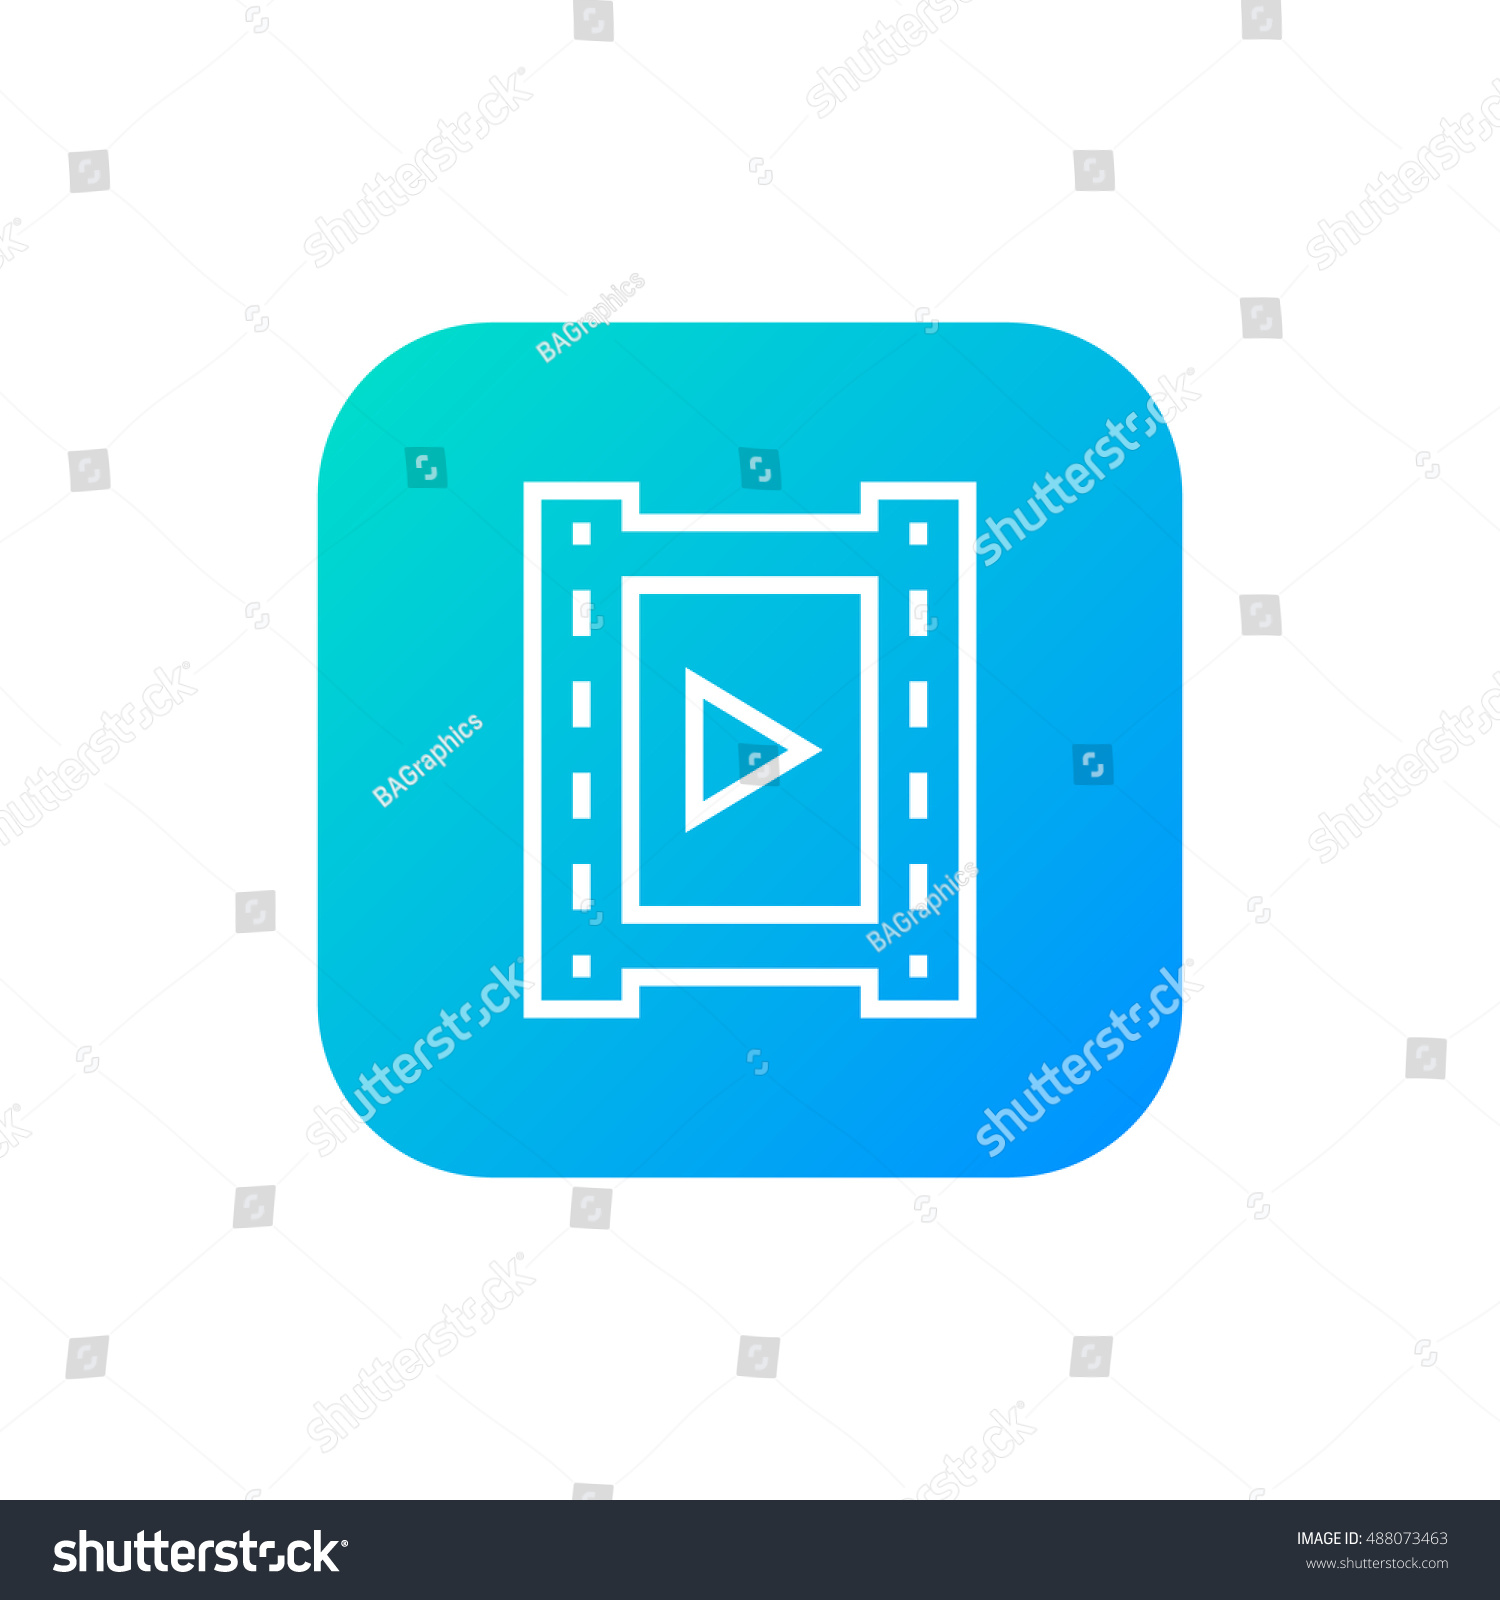 SVG of Video icon vector, clip art. Also useful as logo, square app icon, web element, symbol, graphic image, silhouette and illustration. Compatible with ai, cdr, jpg, png, svg, pdf, ico  and eps formats. svg